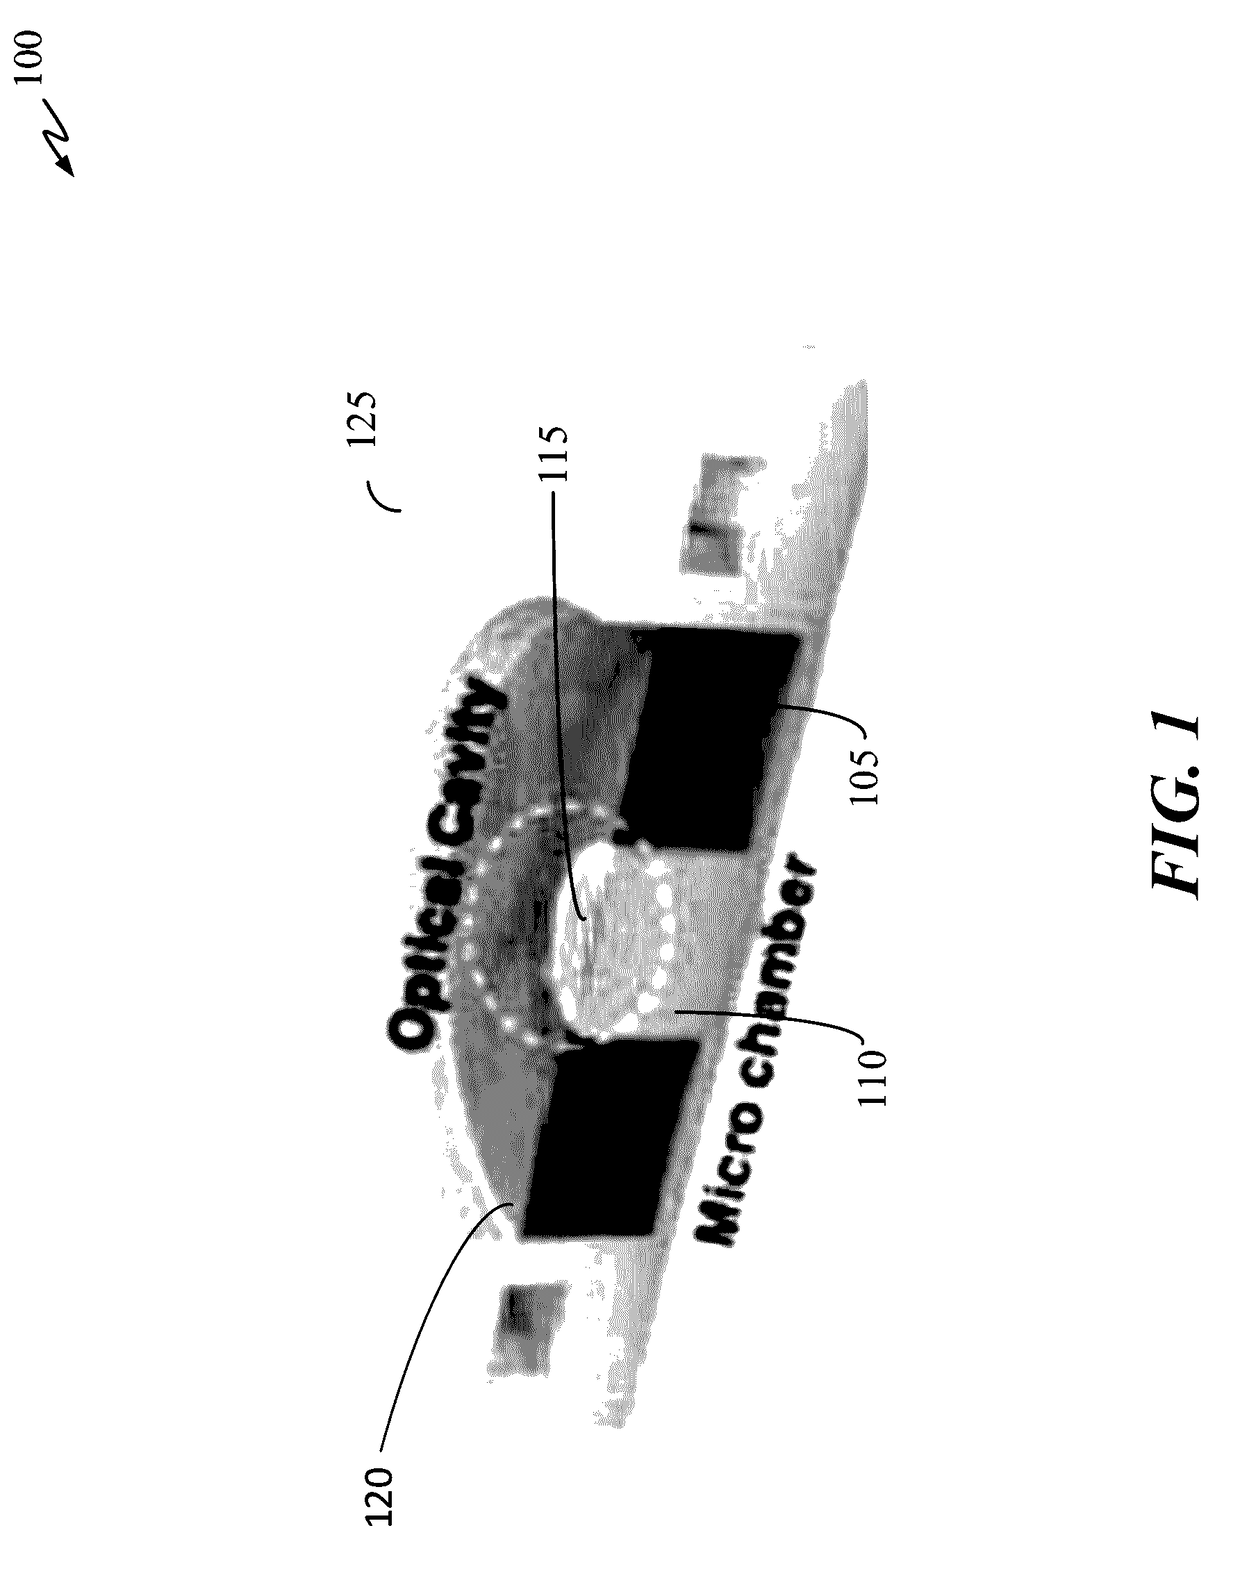 System and method for measuring intraocular pressure